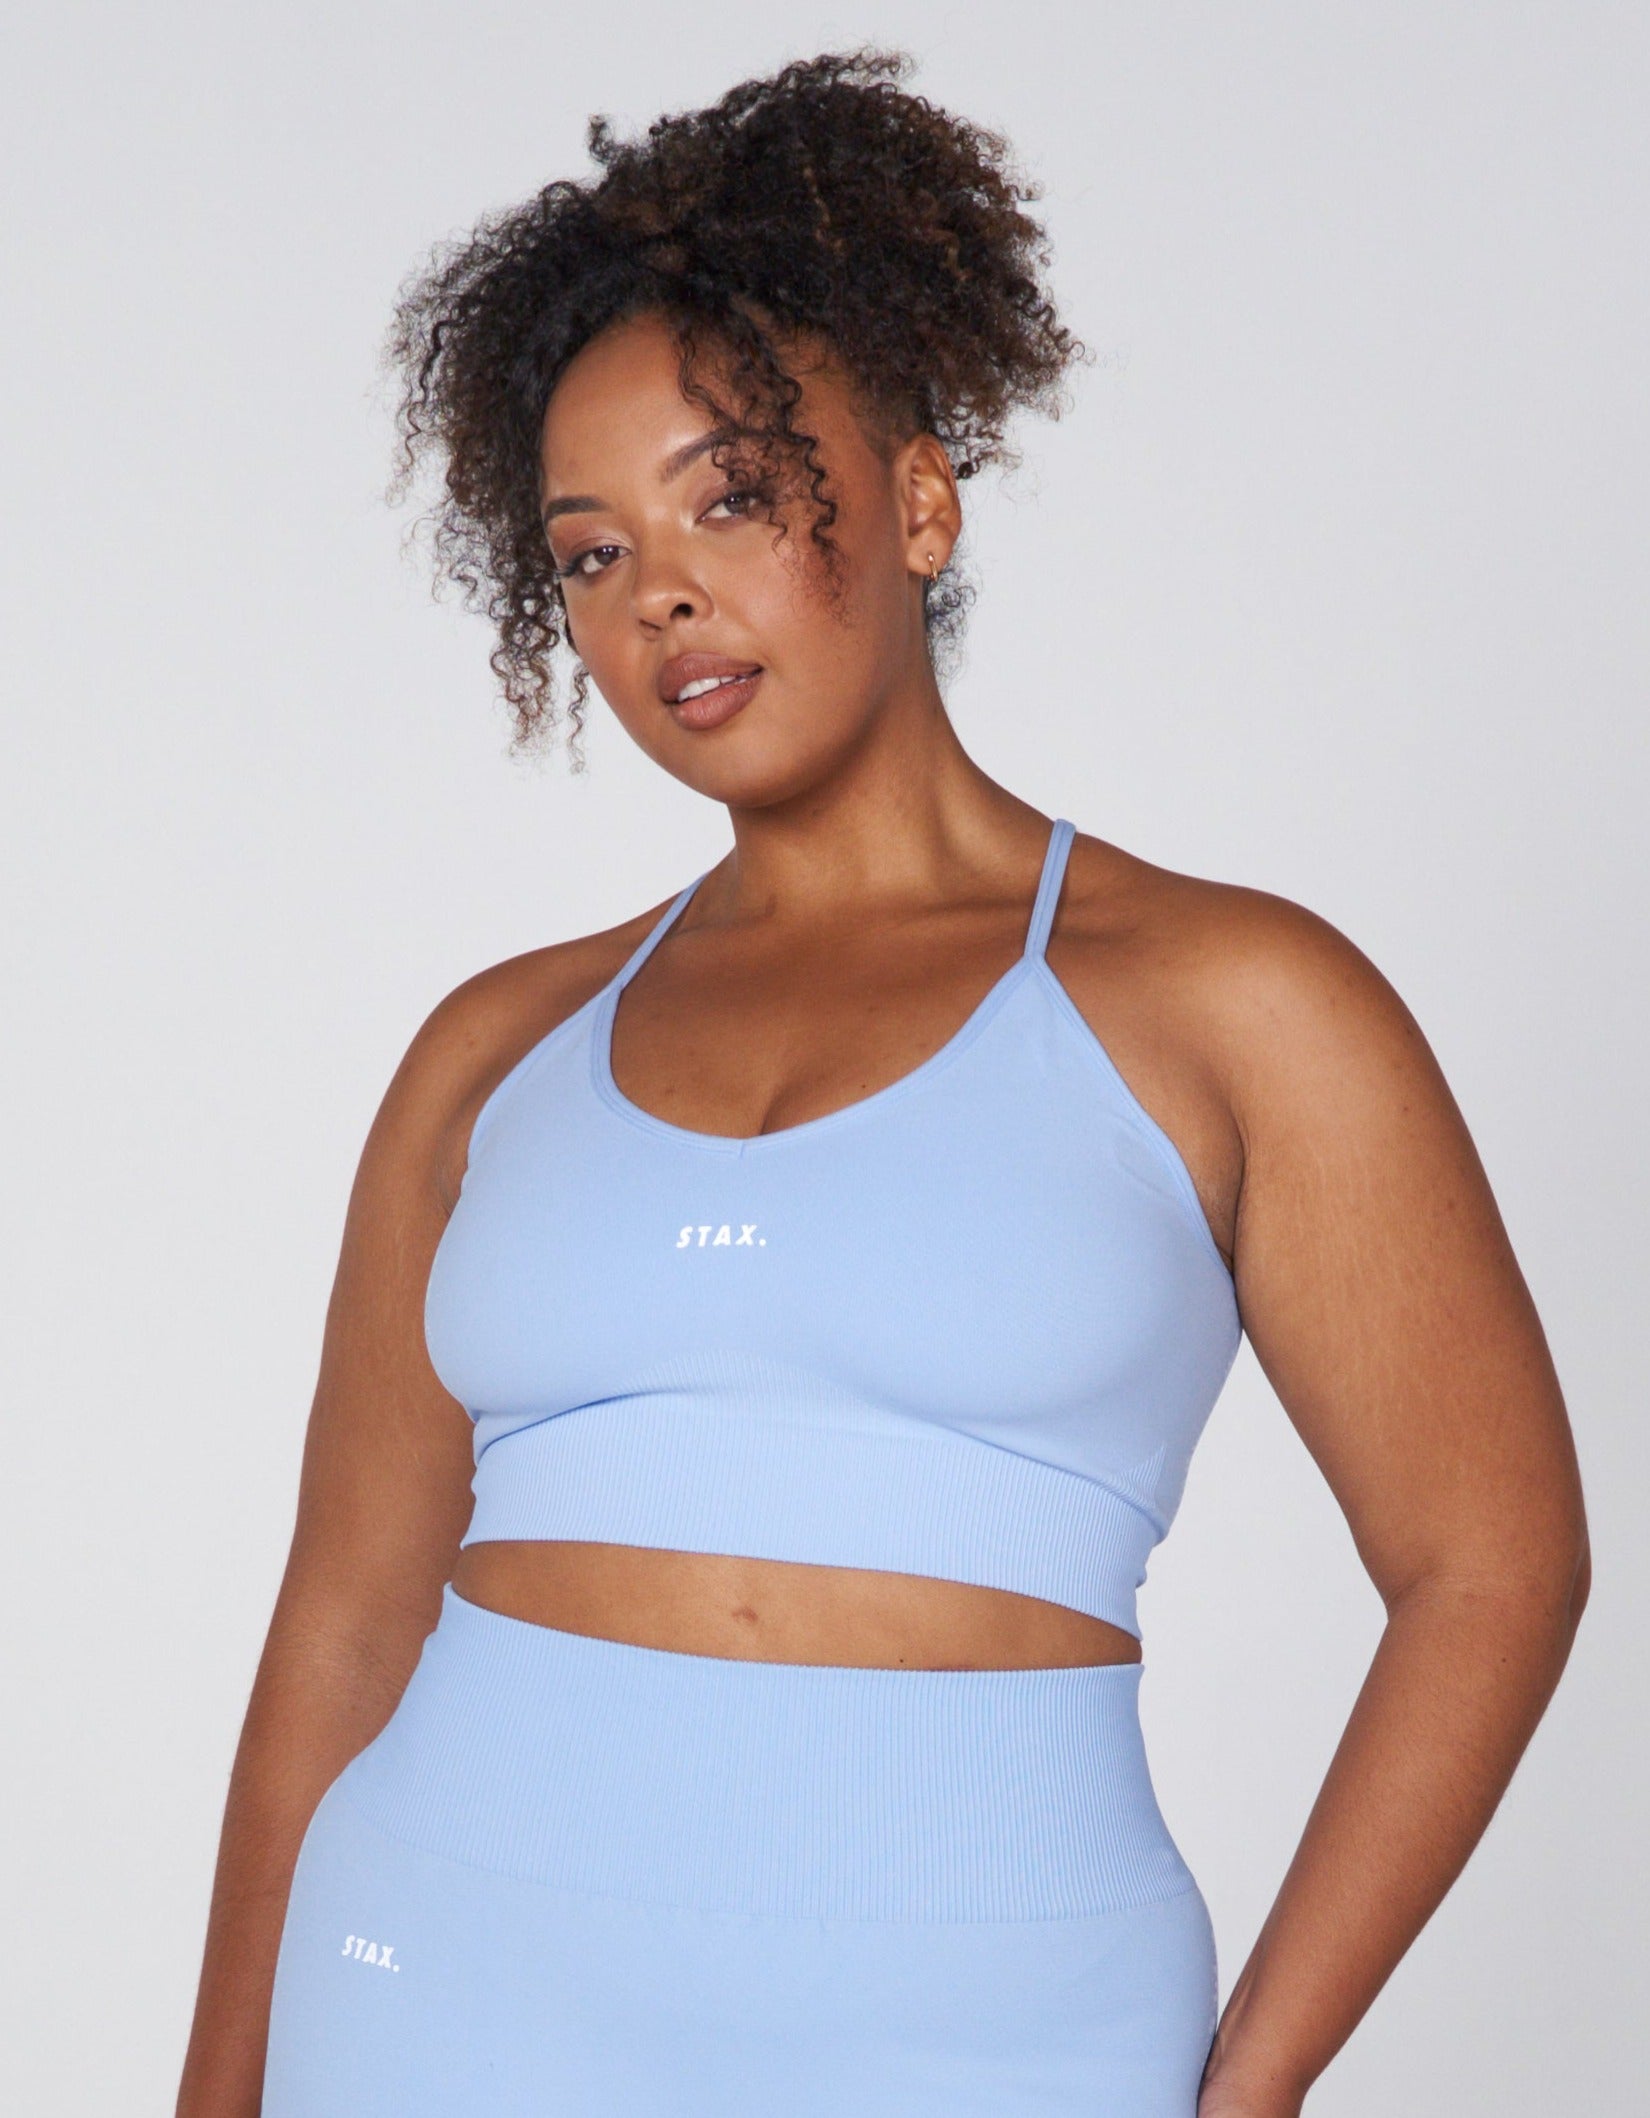 stax-psf-strappy-crop-baby-blue